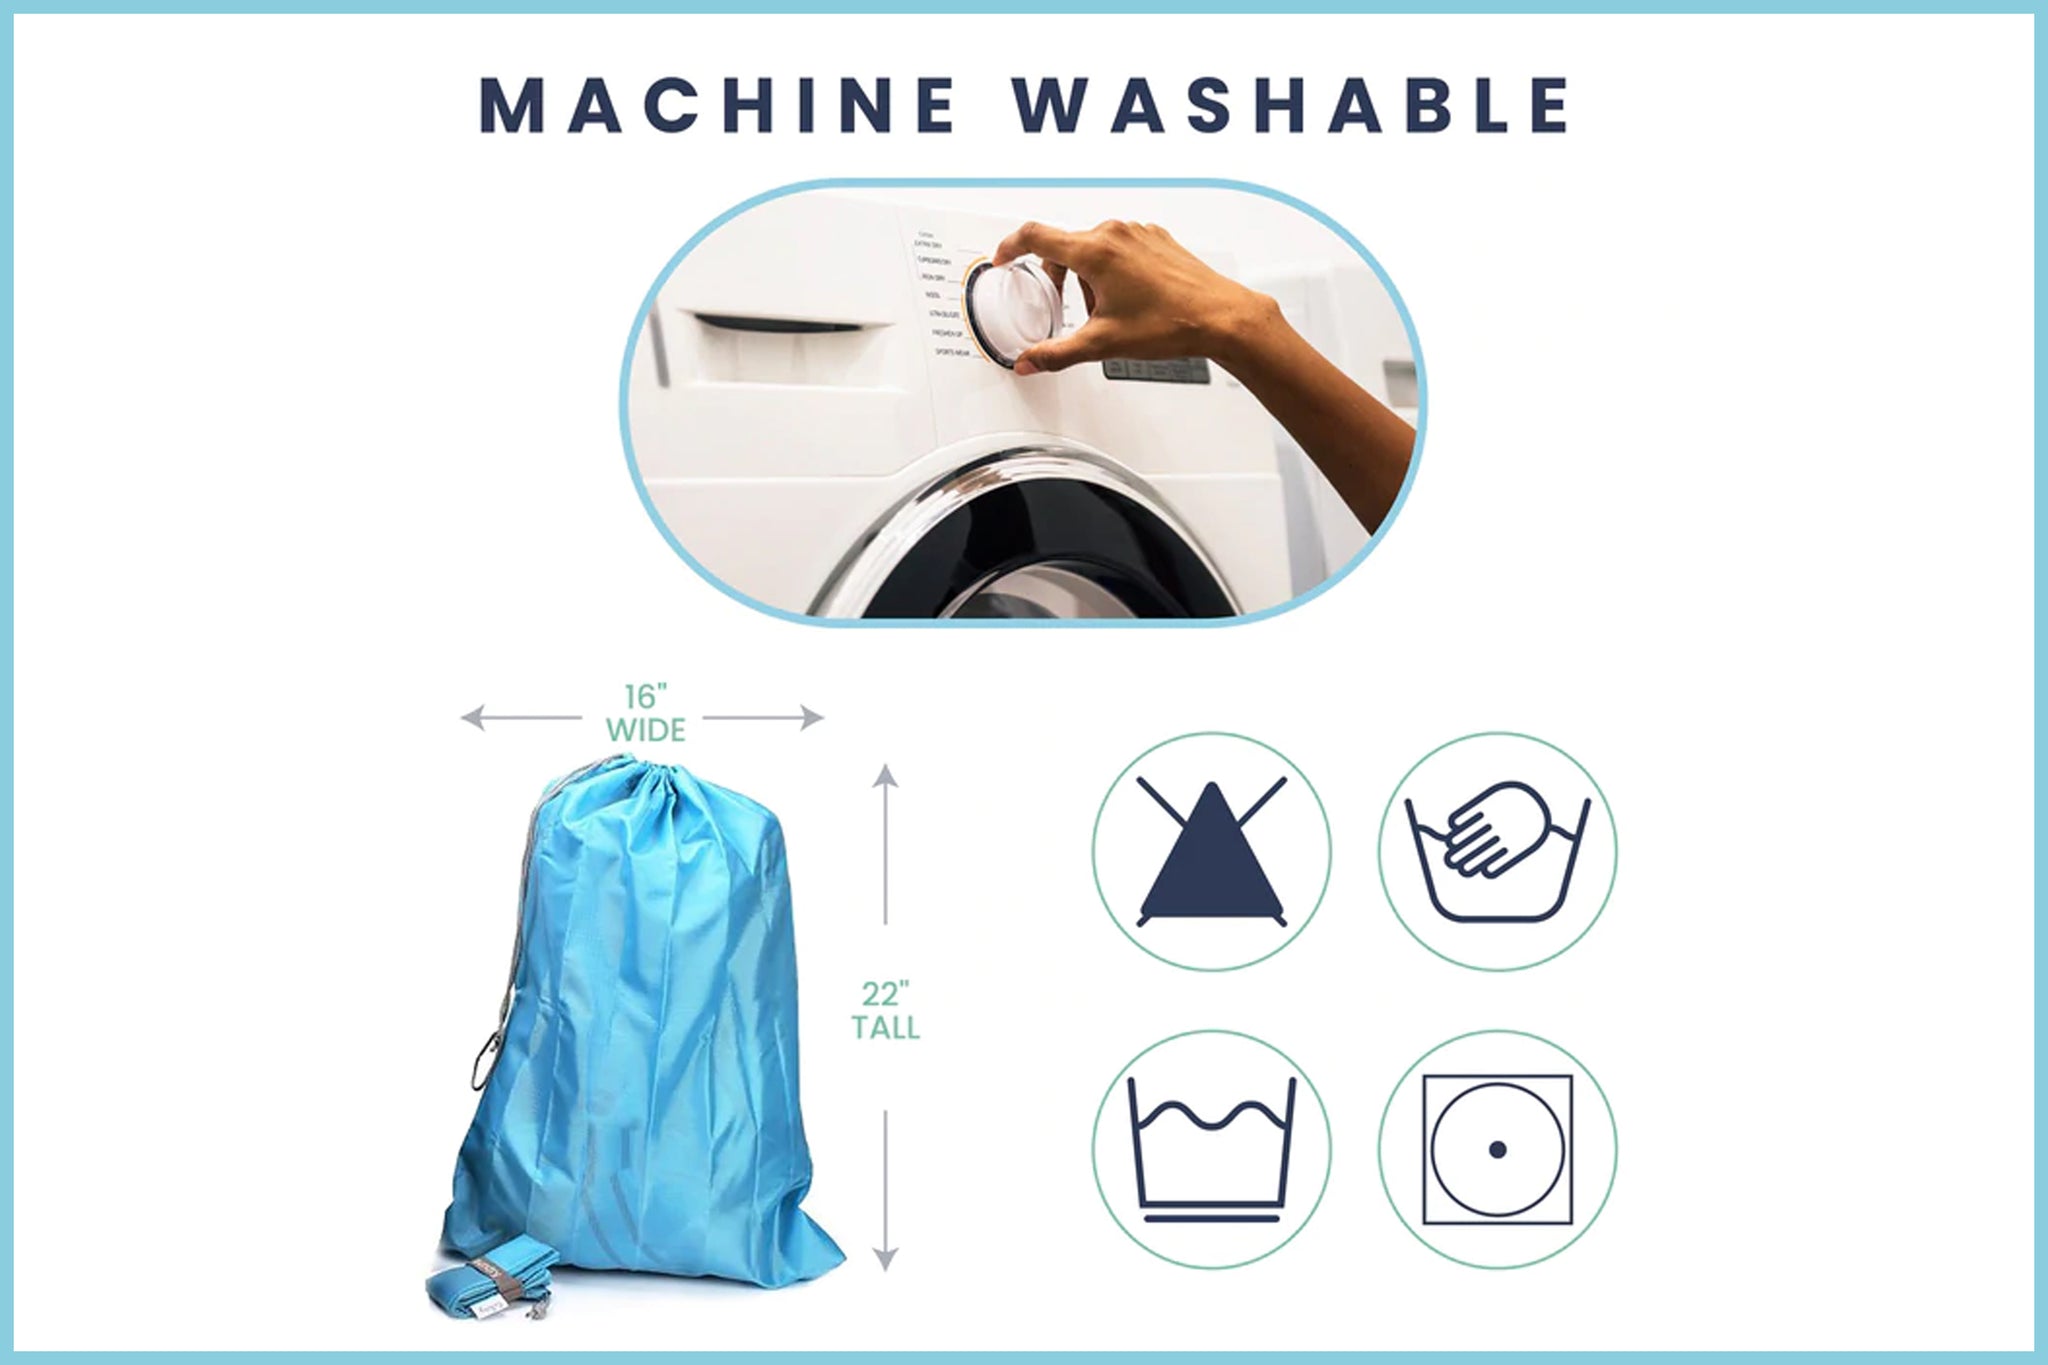 Travel Laundry Bag for Dirty Clothes - Small, Packable and